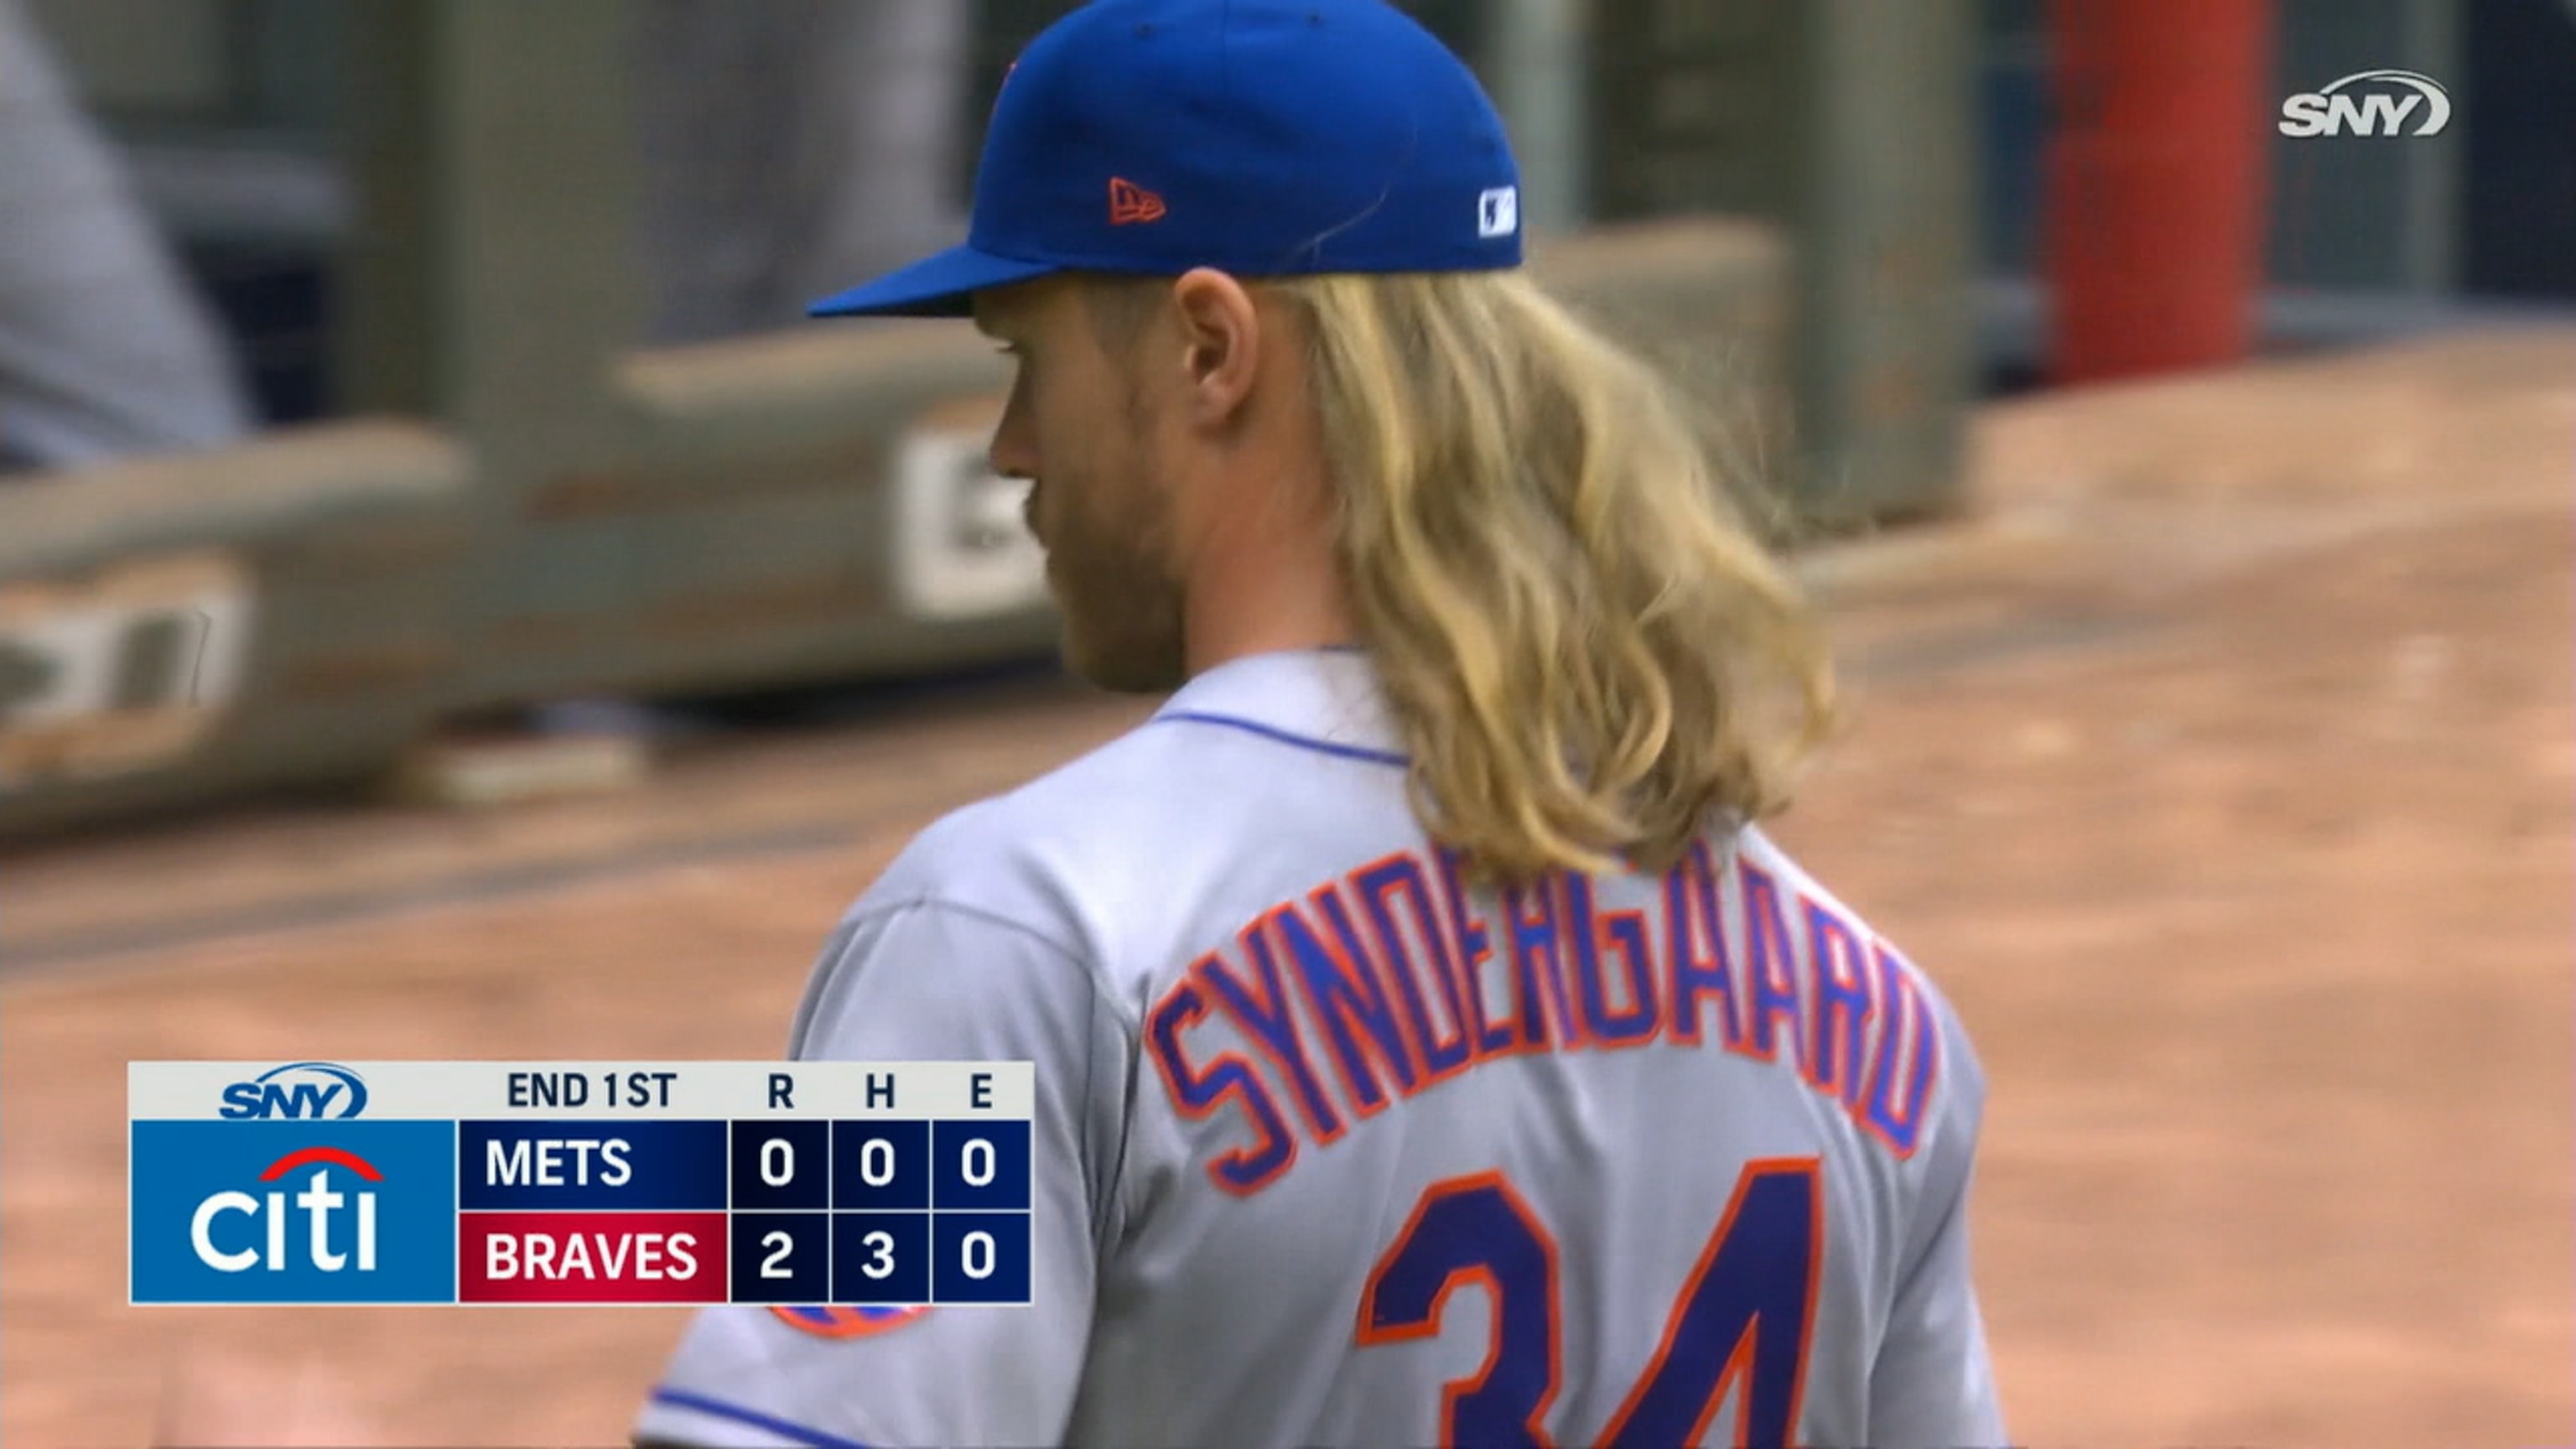 Noah Syndergaard Hair Hat Day among Mets' promotional schedule for 2017 -  Newsday